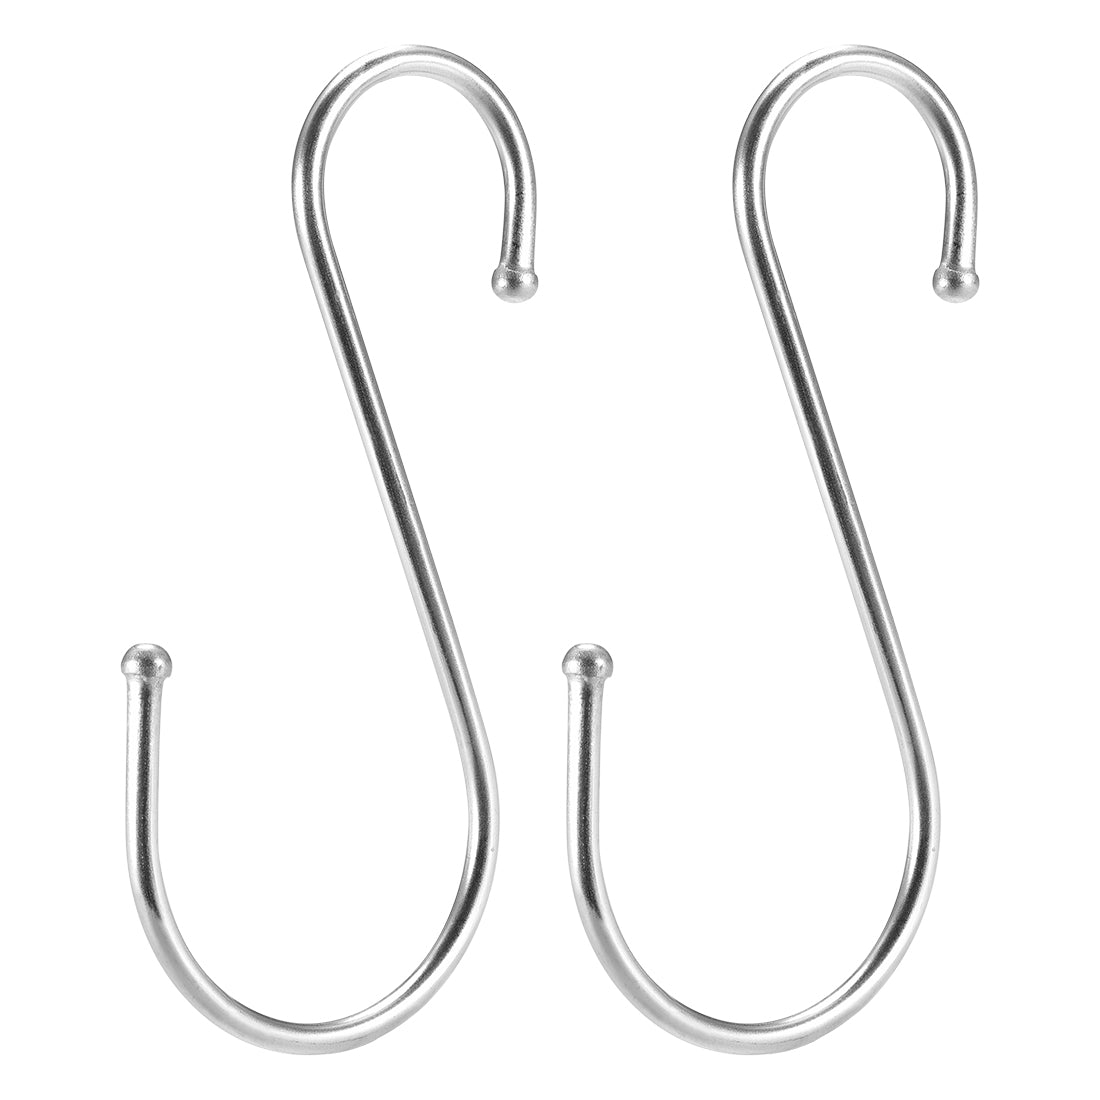 uxcell Uxcell Stainless Steel S Hooks 4.9" S Shaped Hook Hangers 2pcs